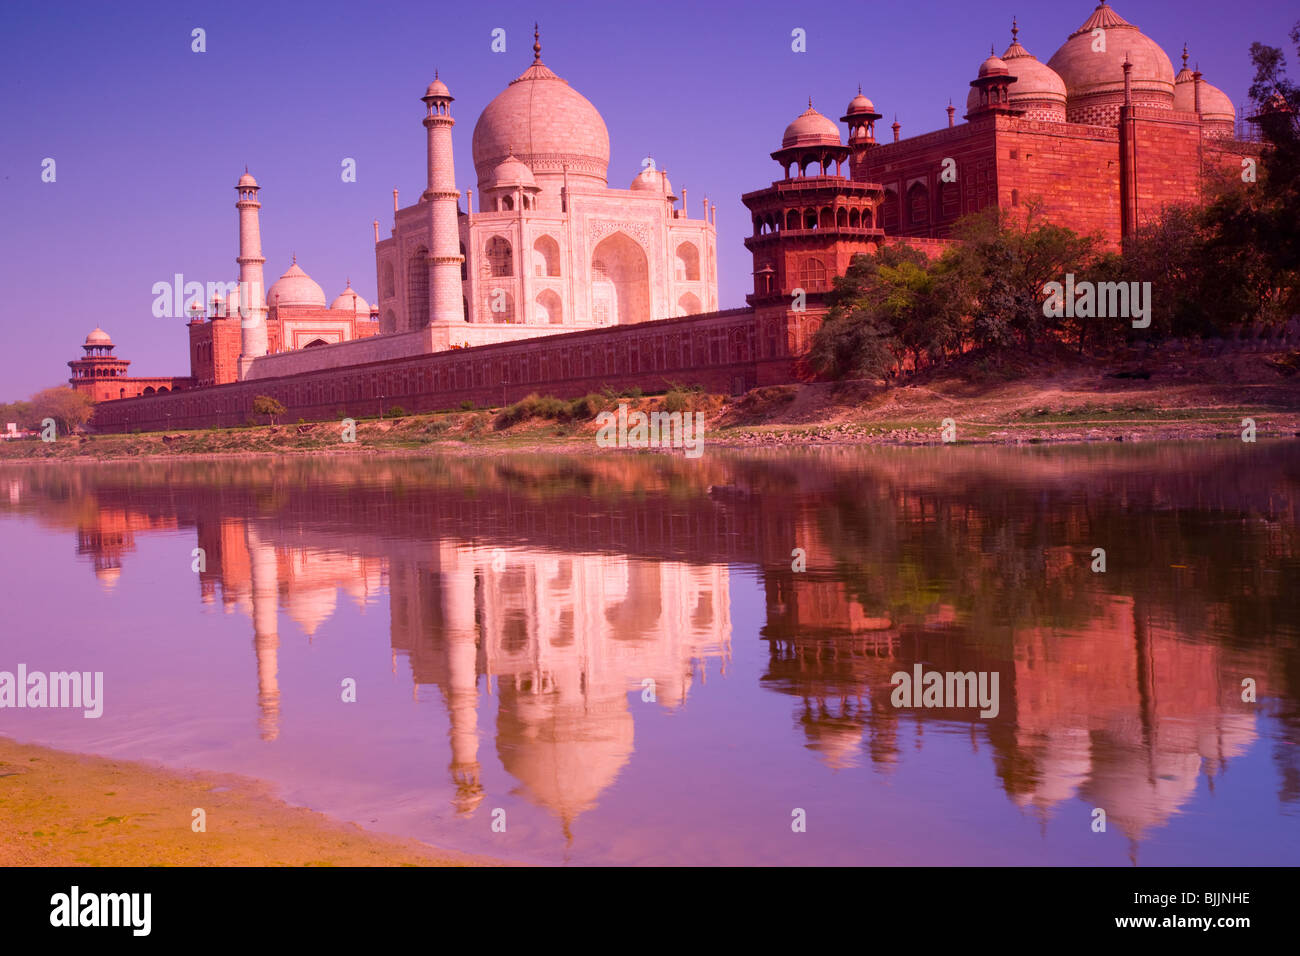 Taj Mahal seen from the Yamuna River, Agra, India, Taj Mahal, UNESCO World Heritage Site, built in 1631 by Shal Jahan for wife Stock Photo